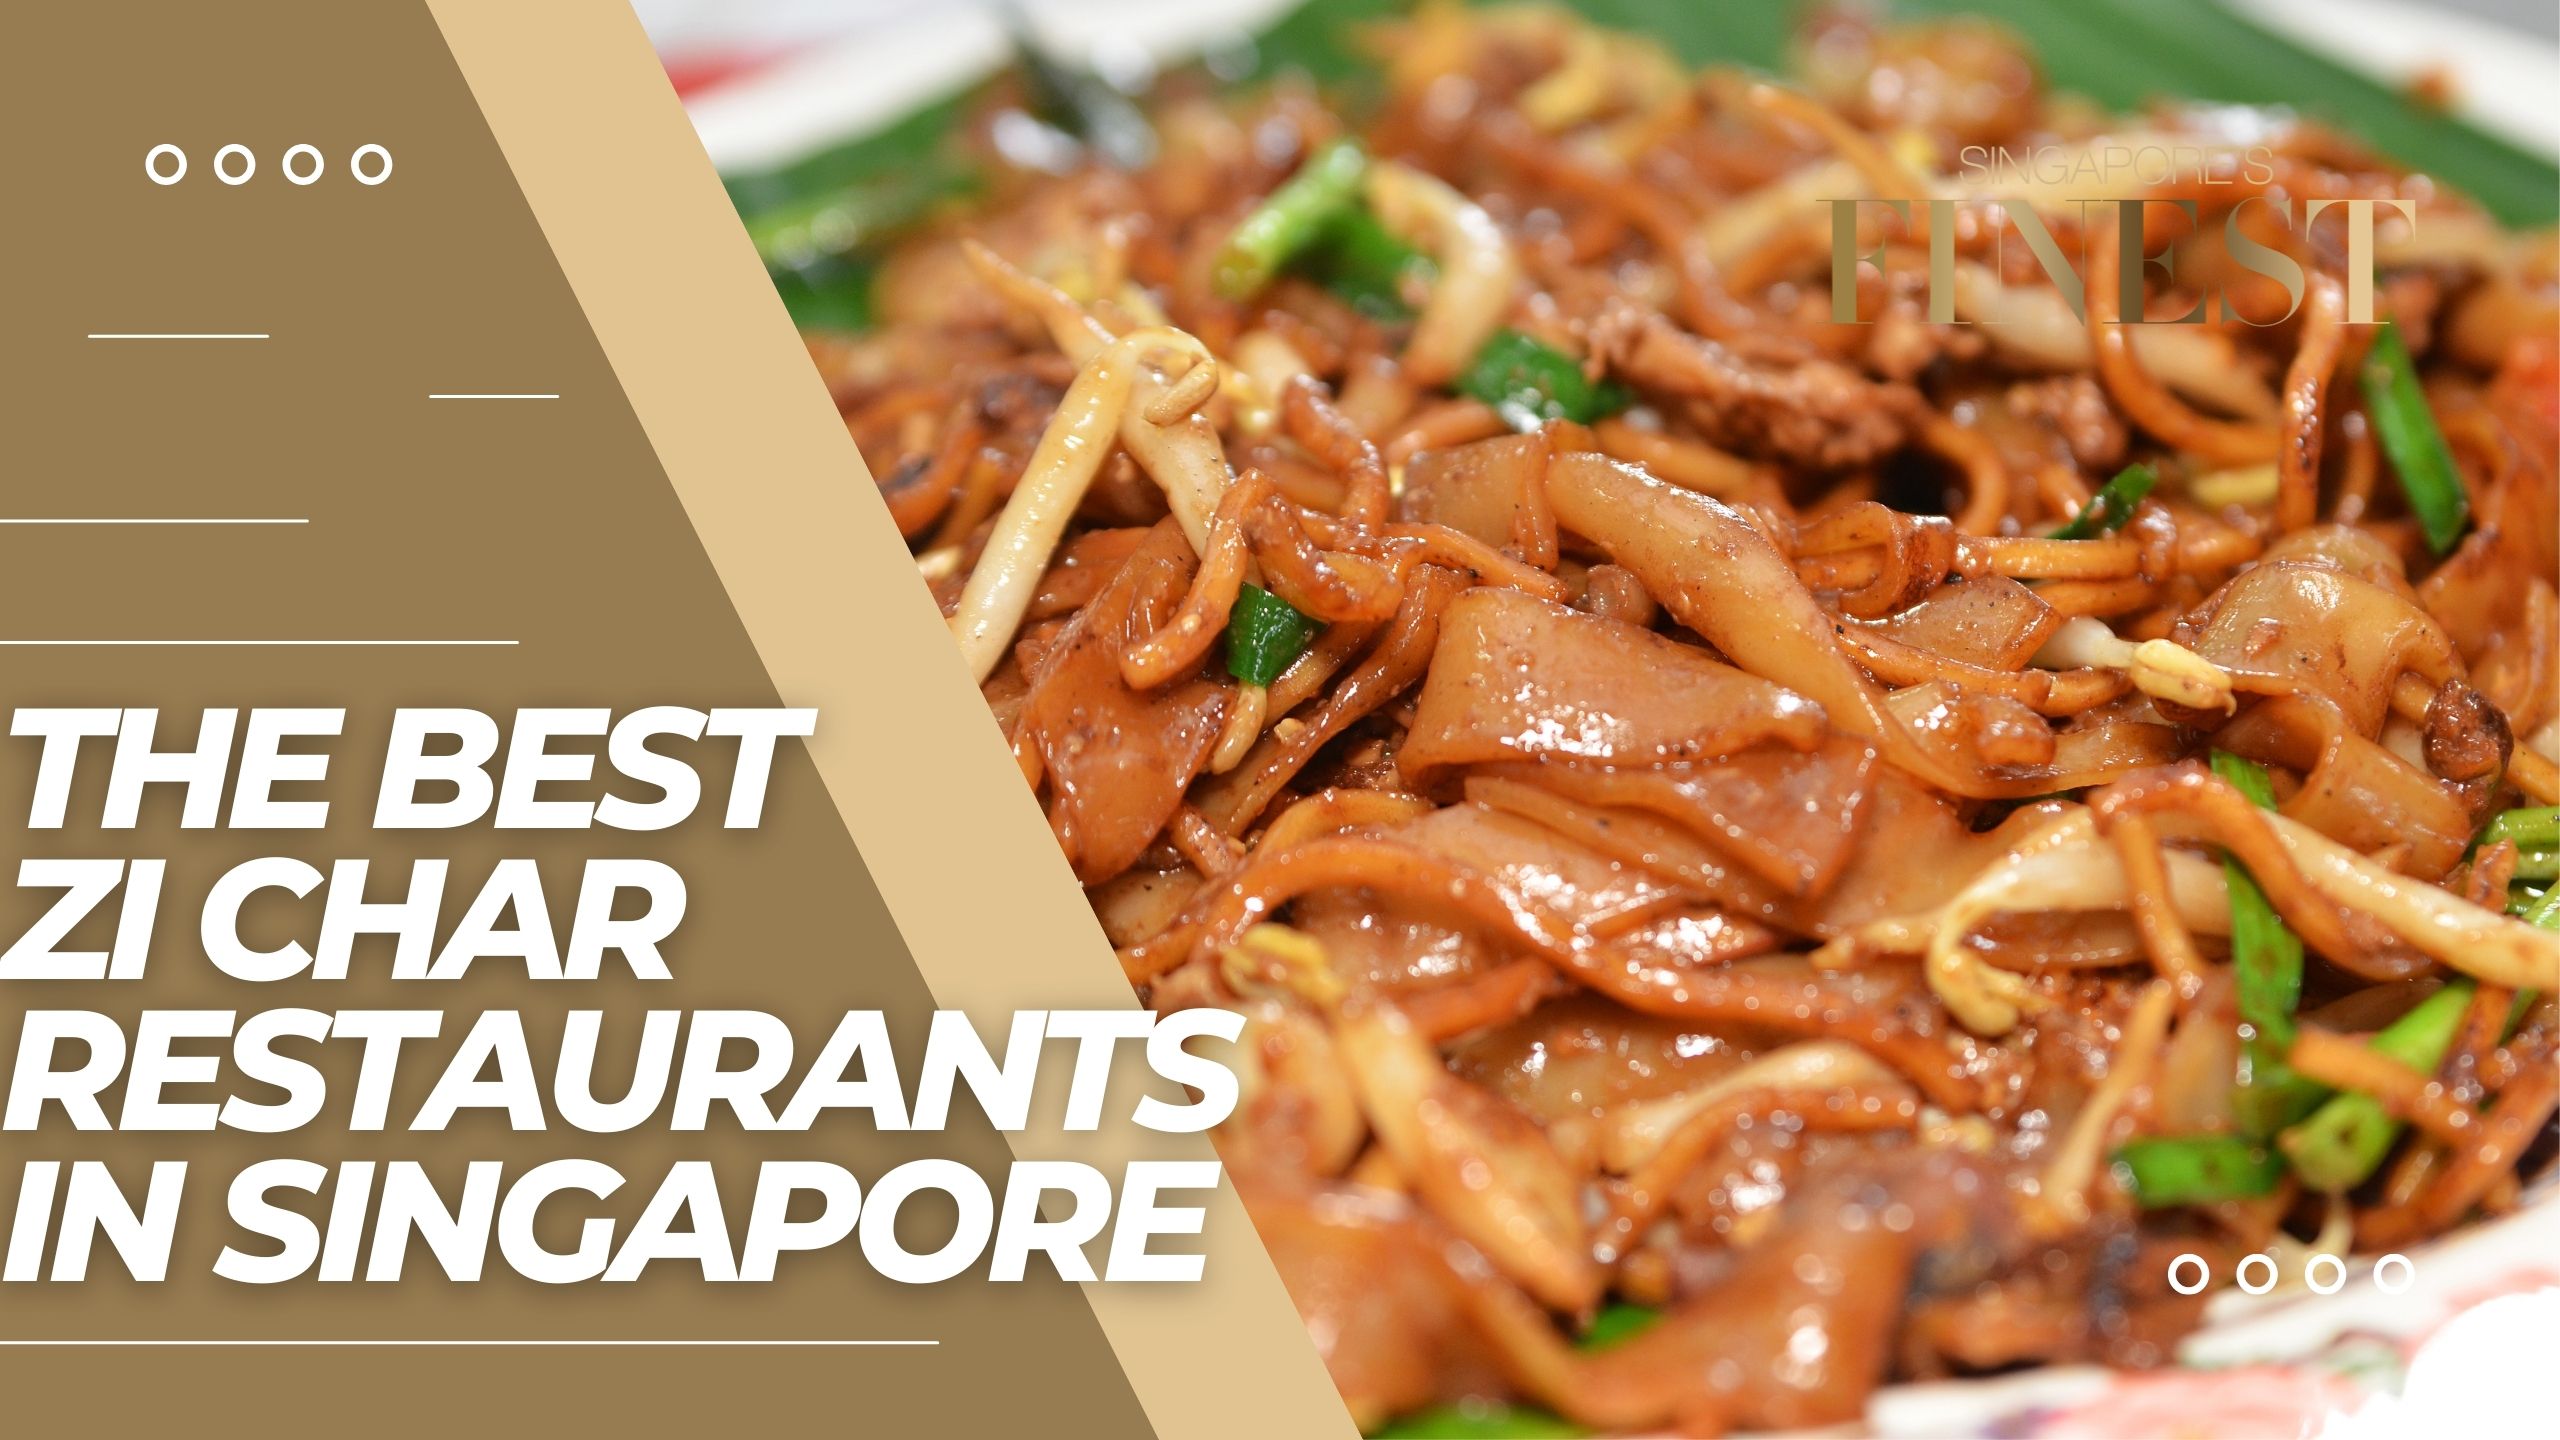 The Finest Zi Char Restaurants in Singapore